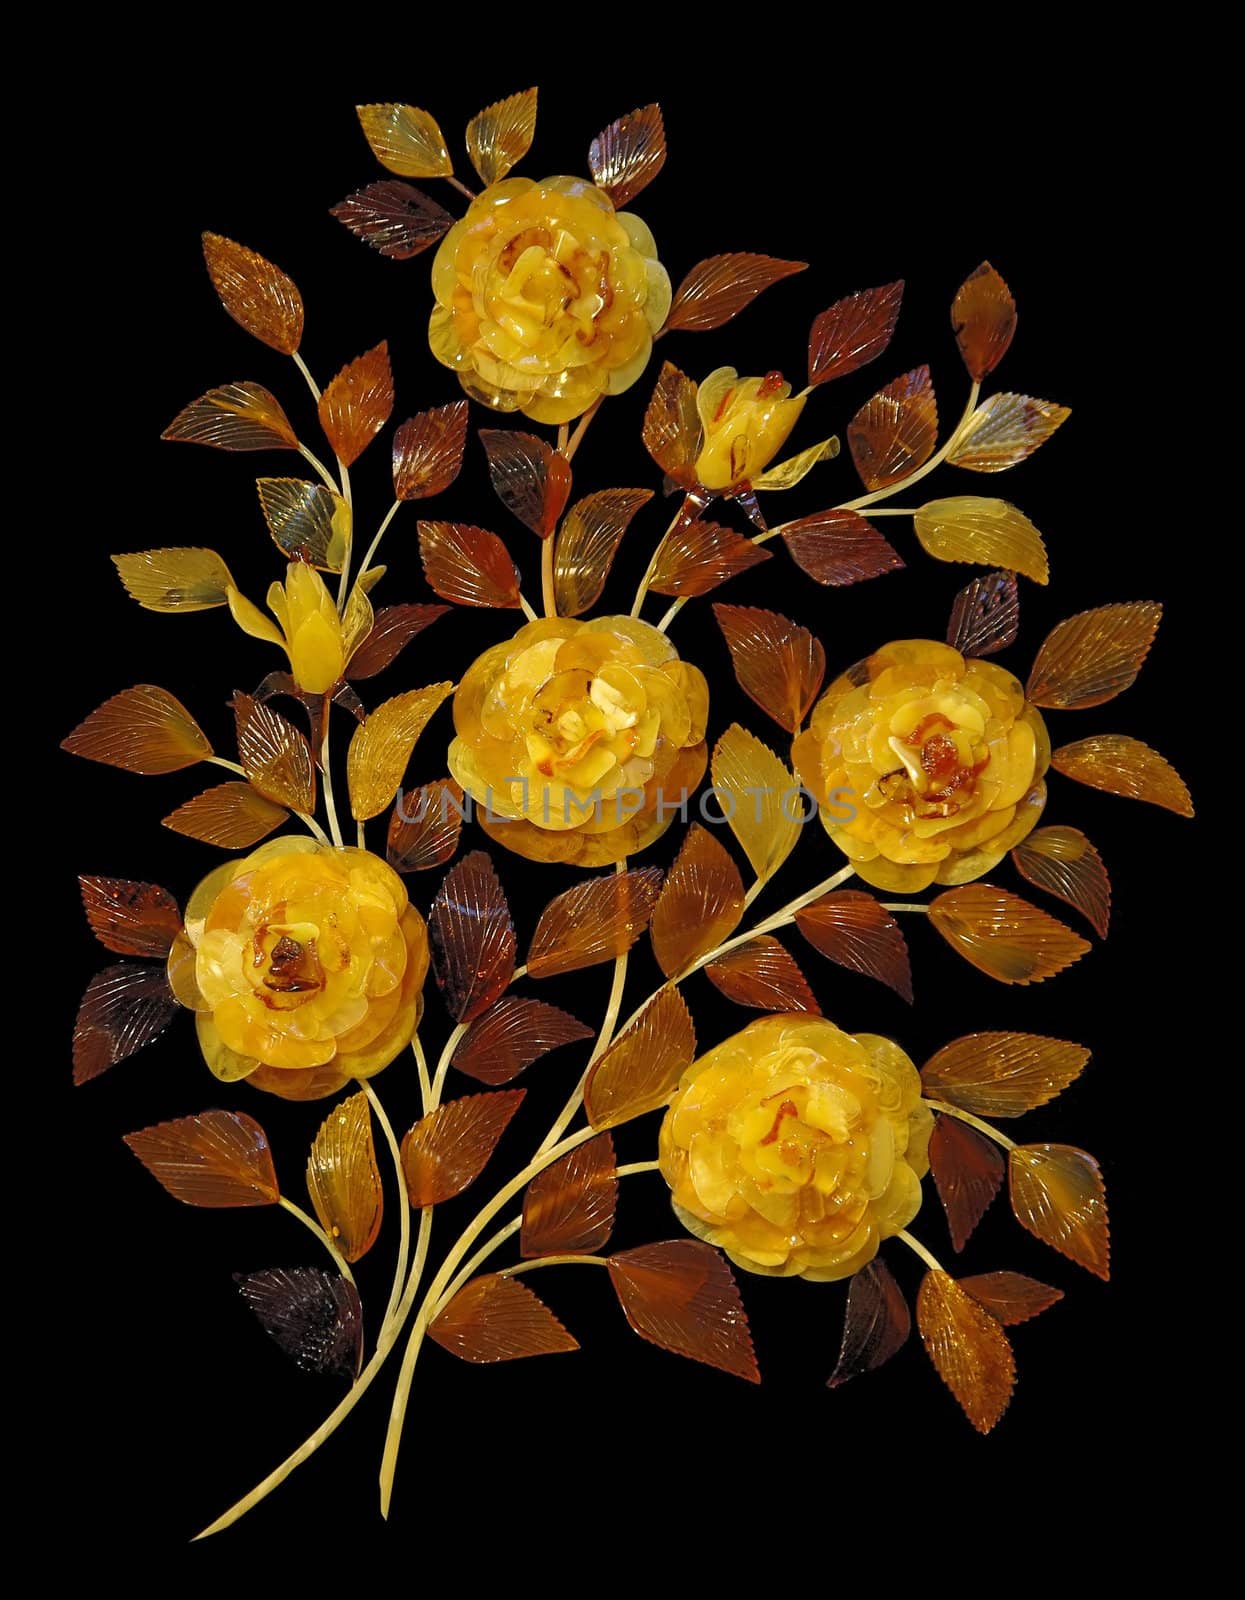 Bouquet of roses made of amber by Vitamin